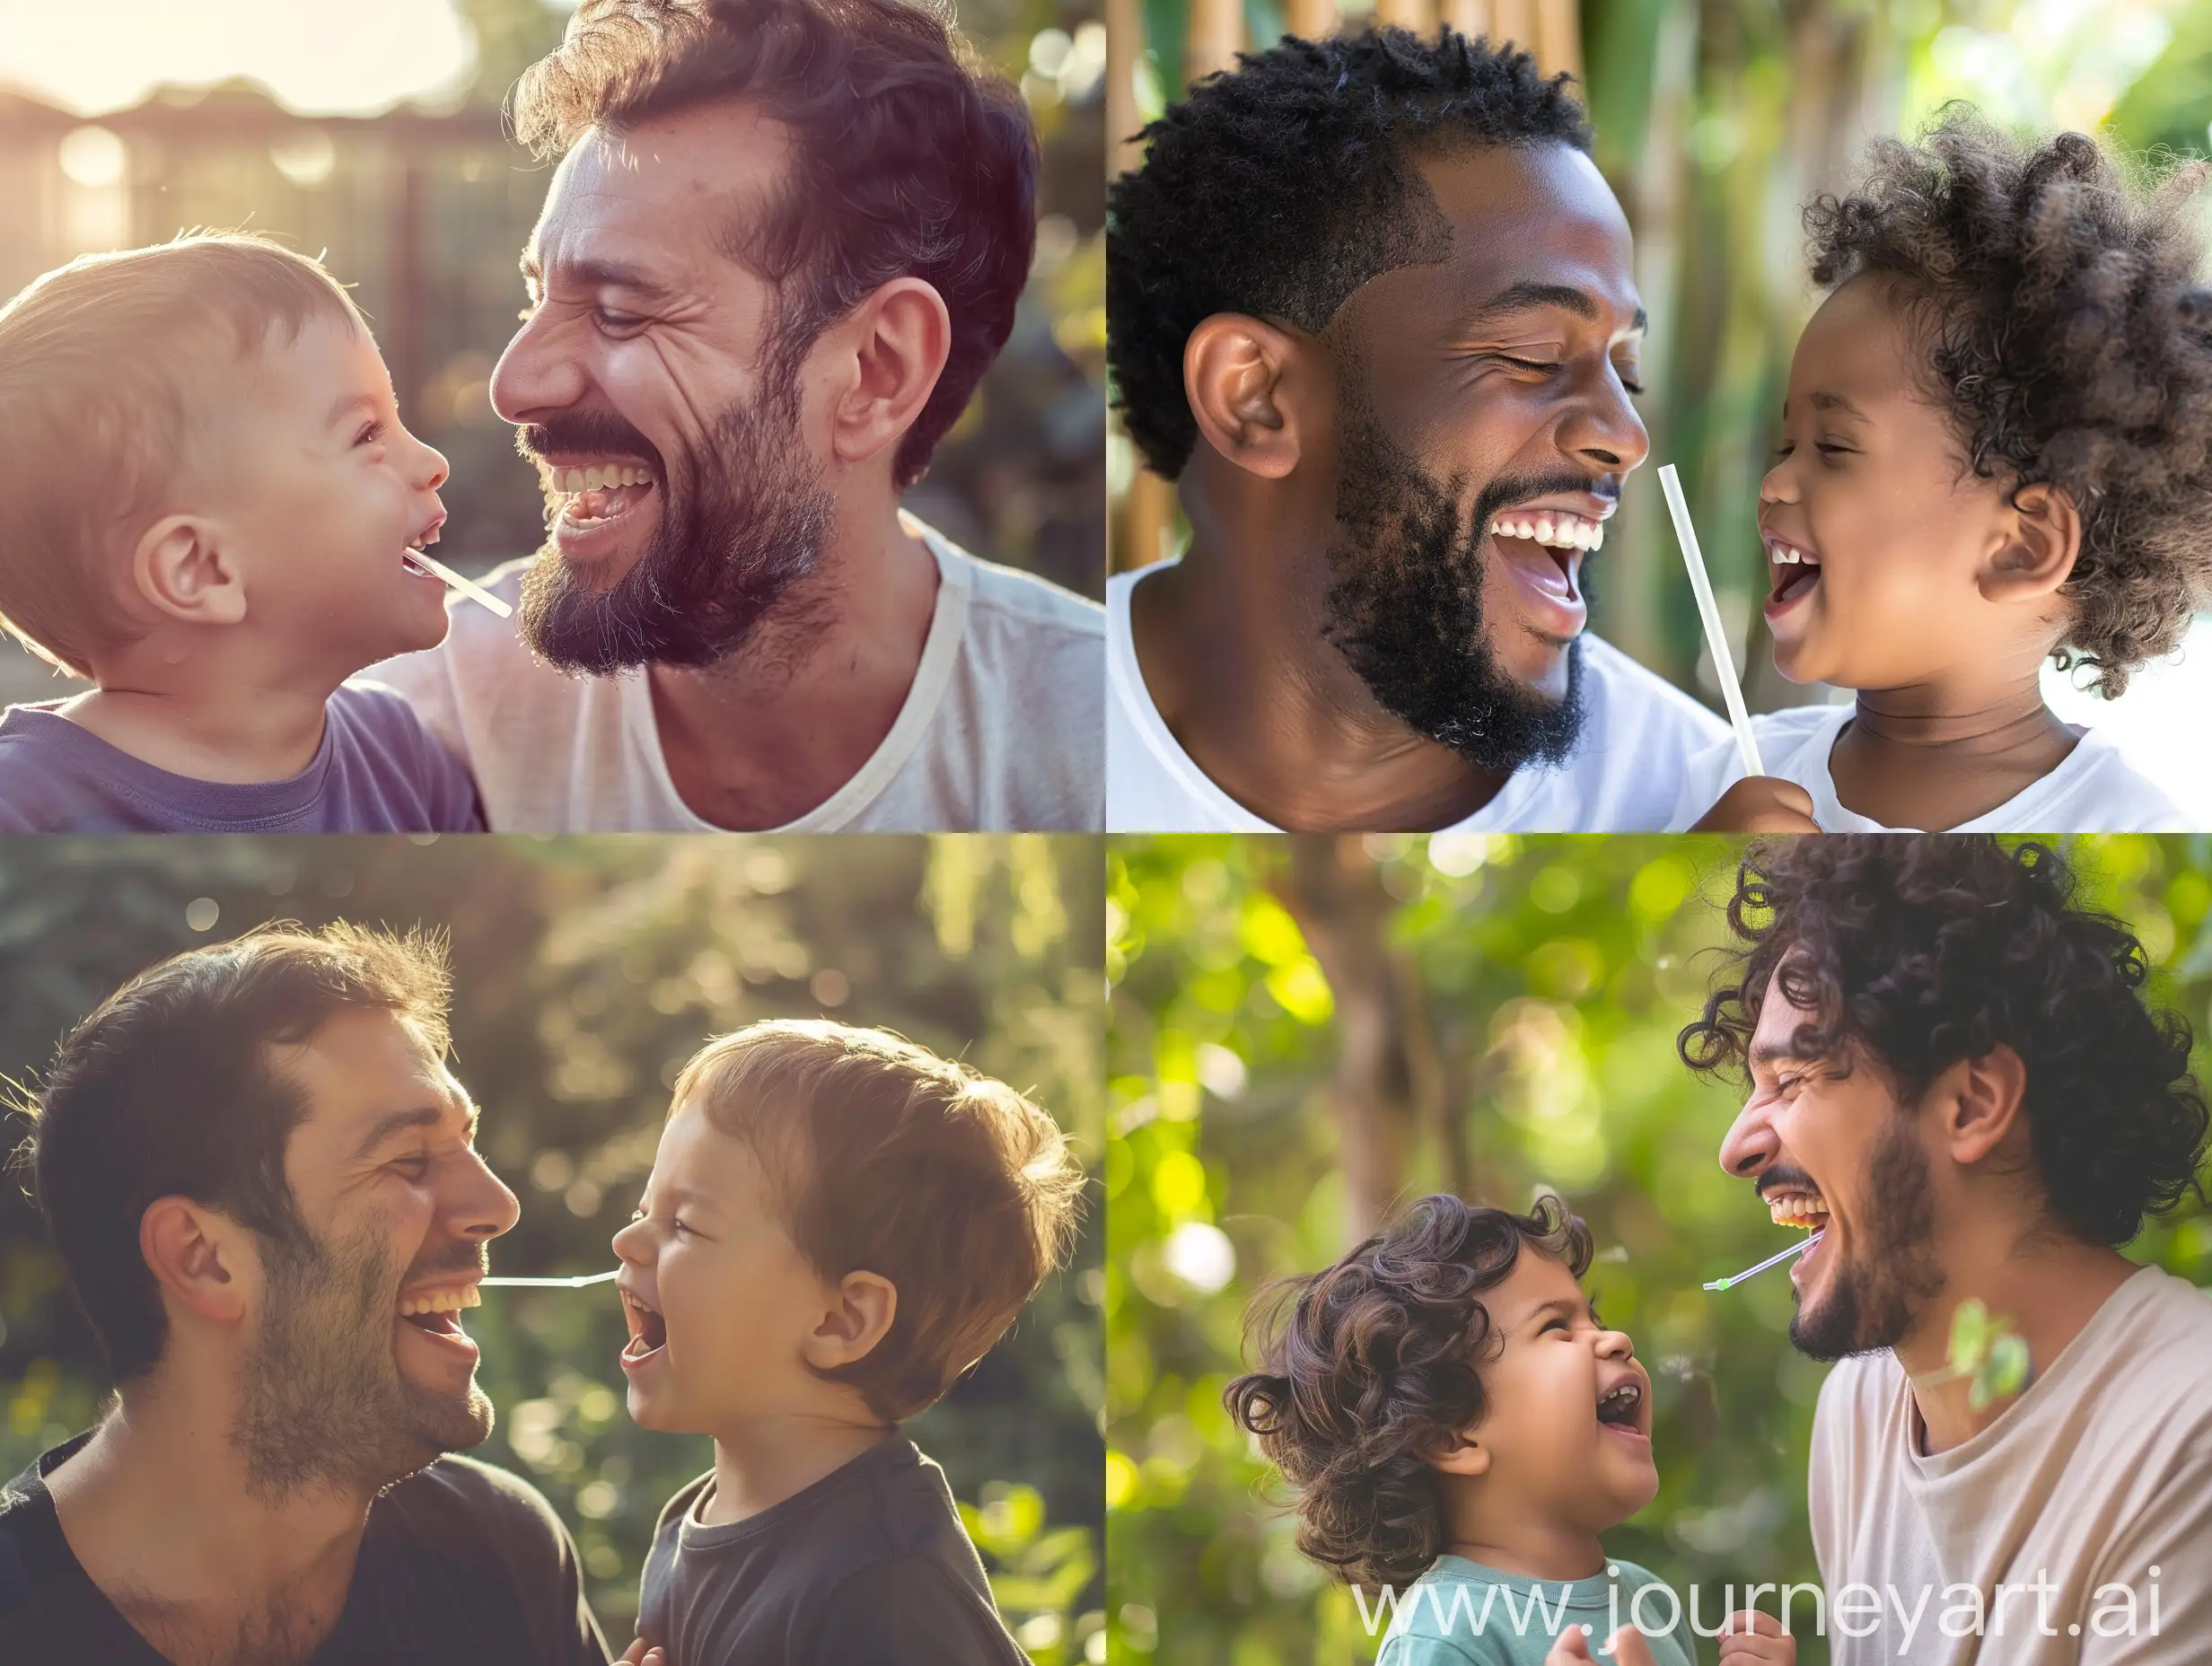 Joyful-Father-and-Son-Laughing-Together-with-Straws